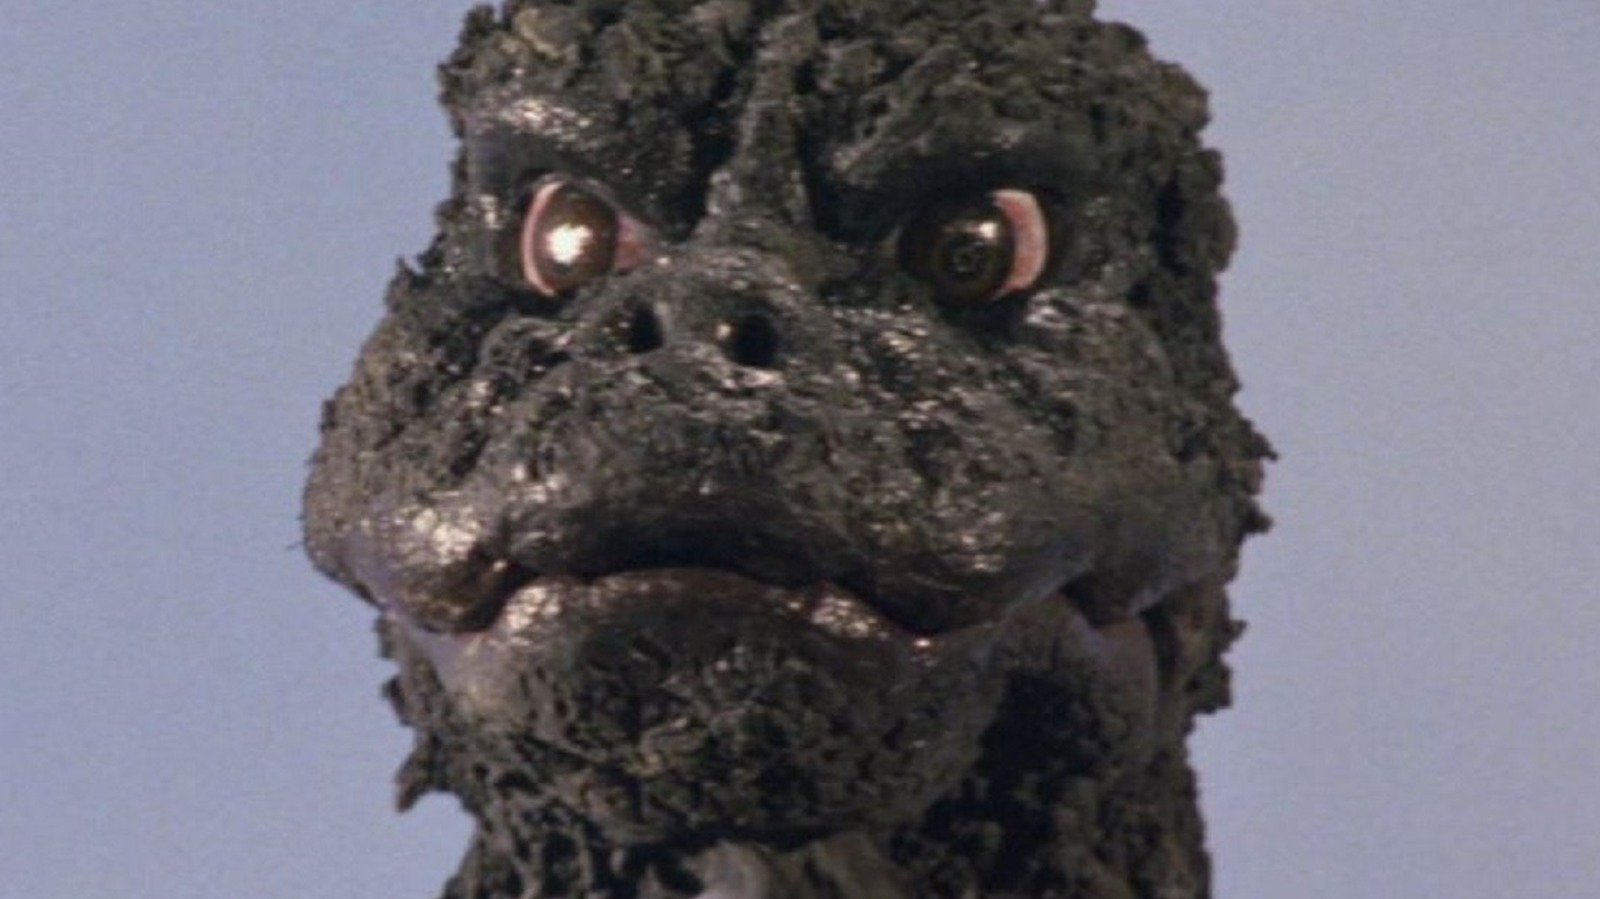 Our Resident Expert Answers The World's Hardest Godzilla Questions